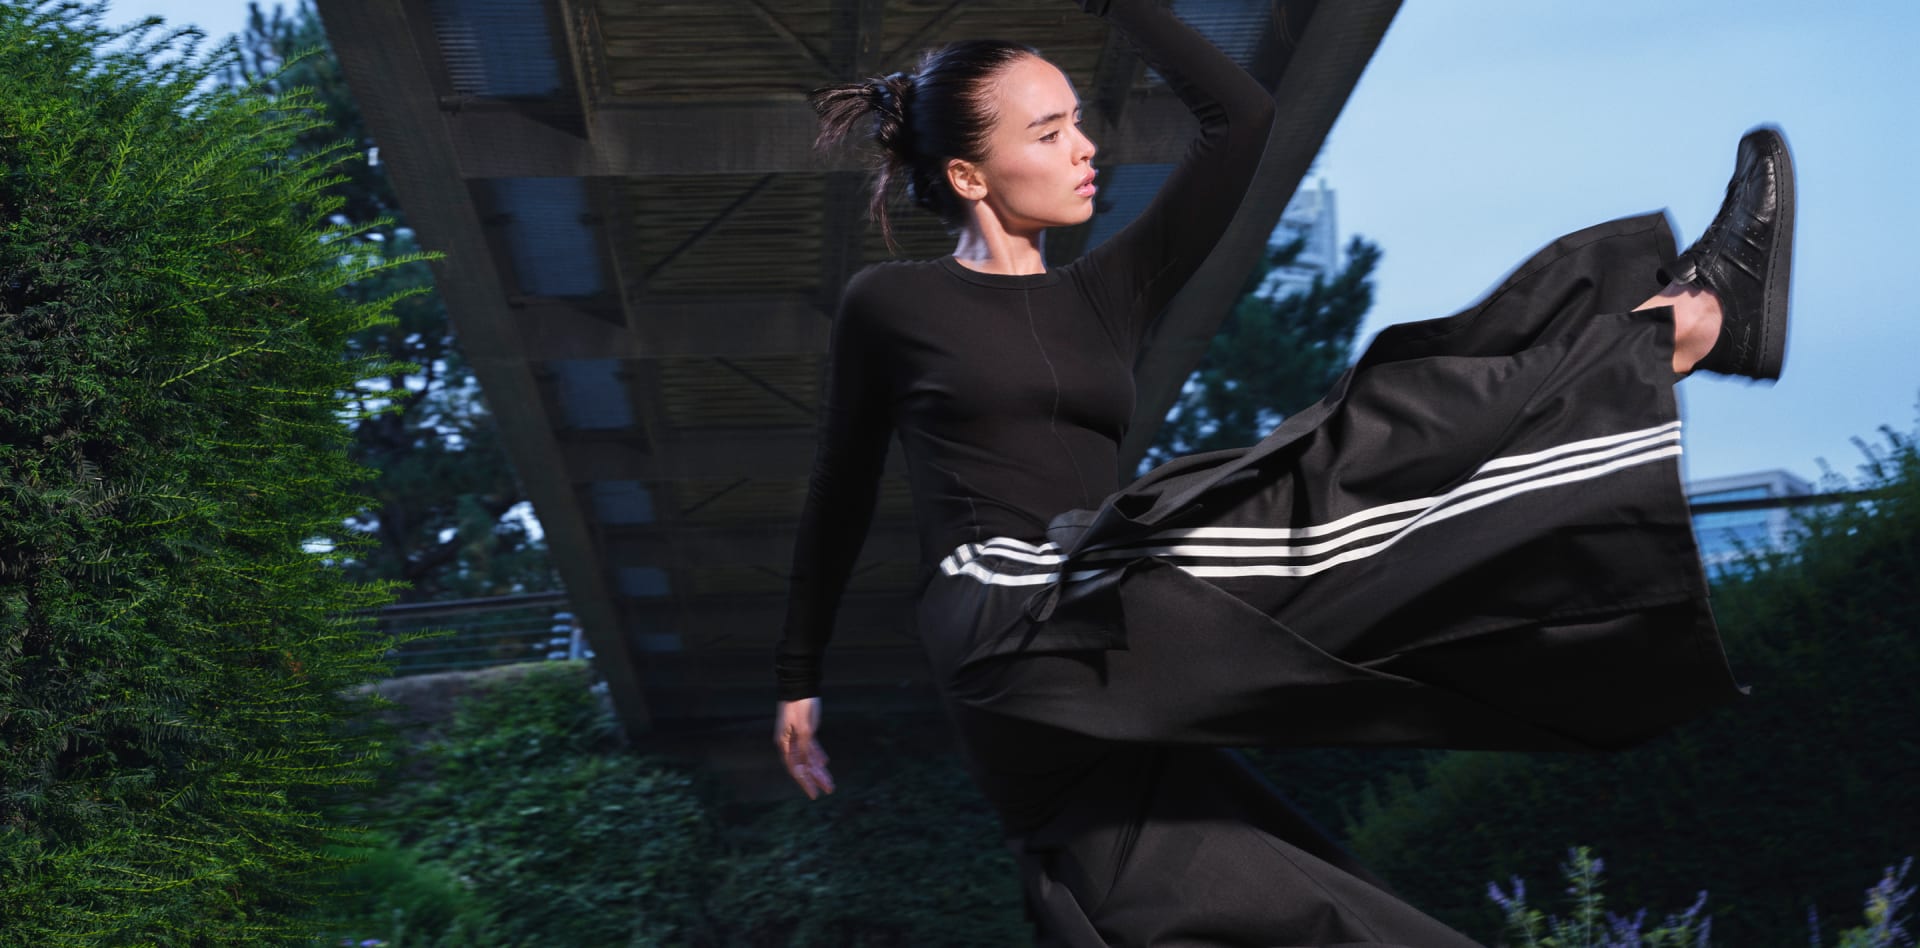 A woman in black Y-3 apparel stands in nature under a concrete bridge, kicking her feet high into the air.